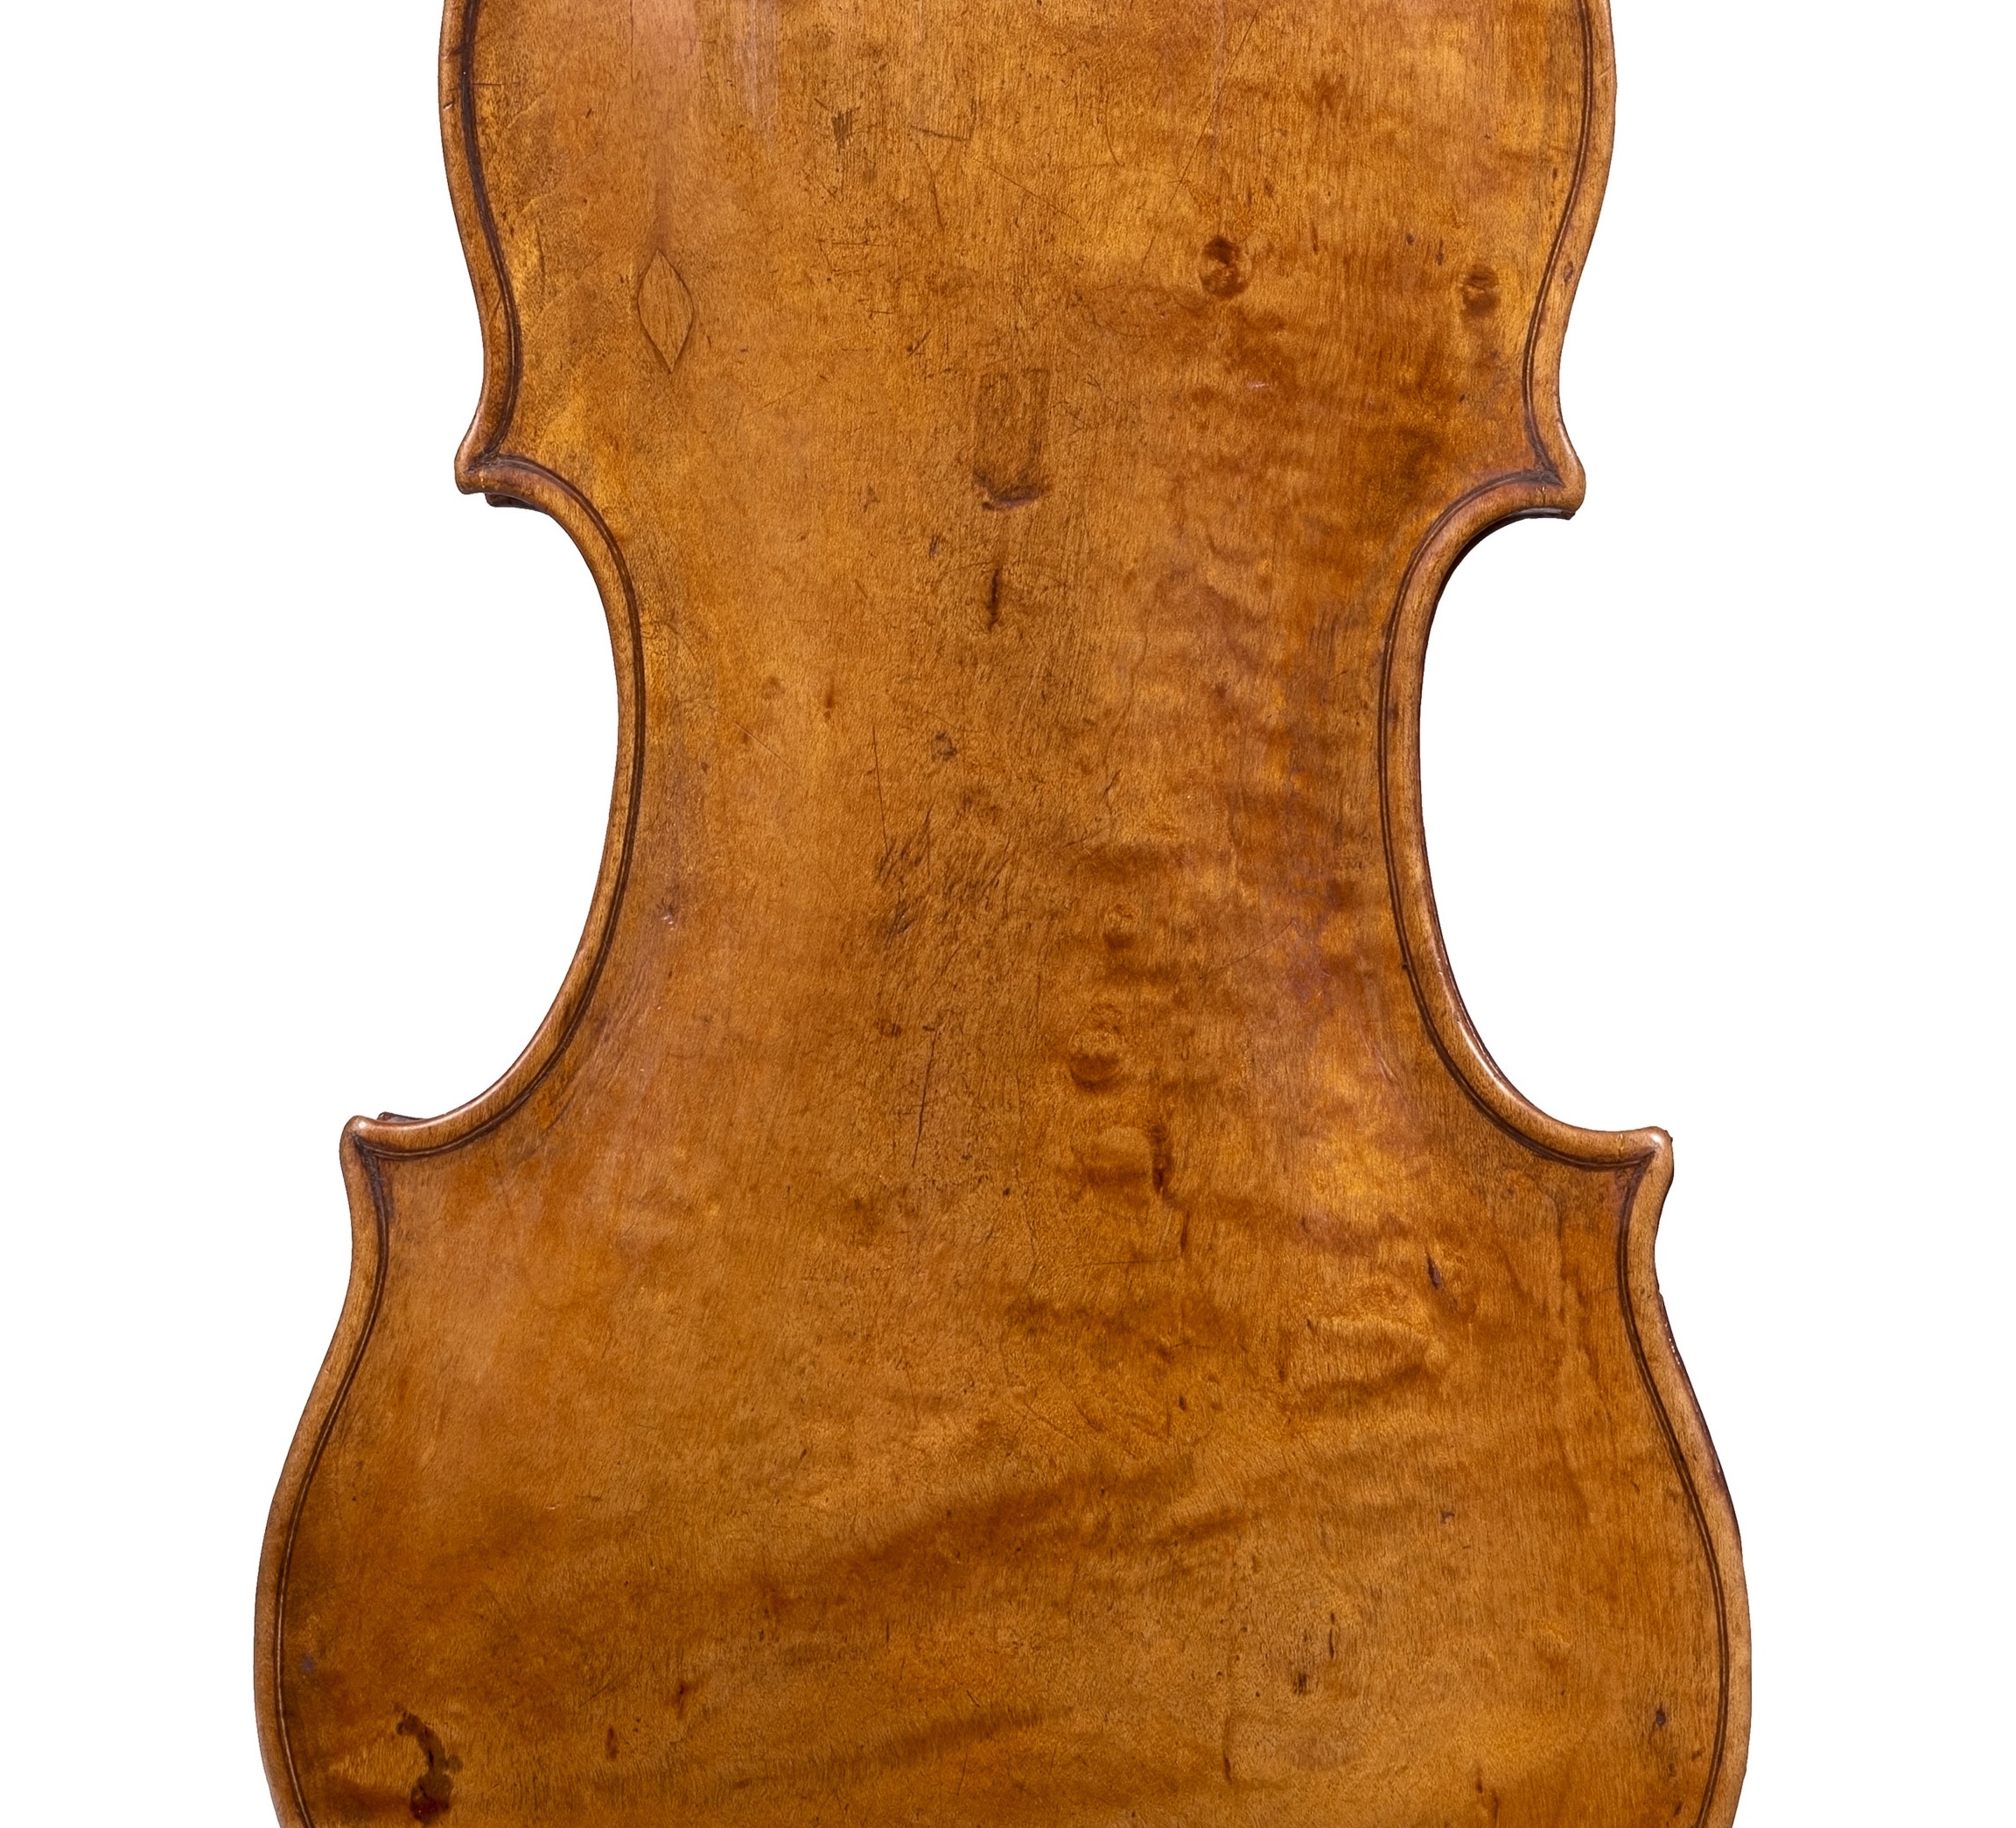 Back of an extremely rare Andrea Amati violin from the Rosenberg Collection to be sold at Ingles & Hayday Ltd